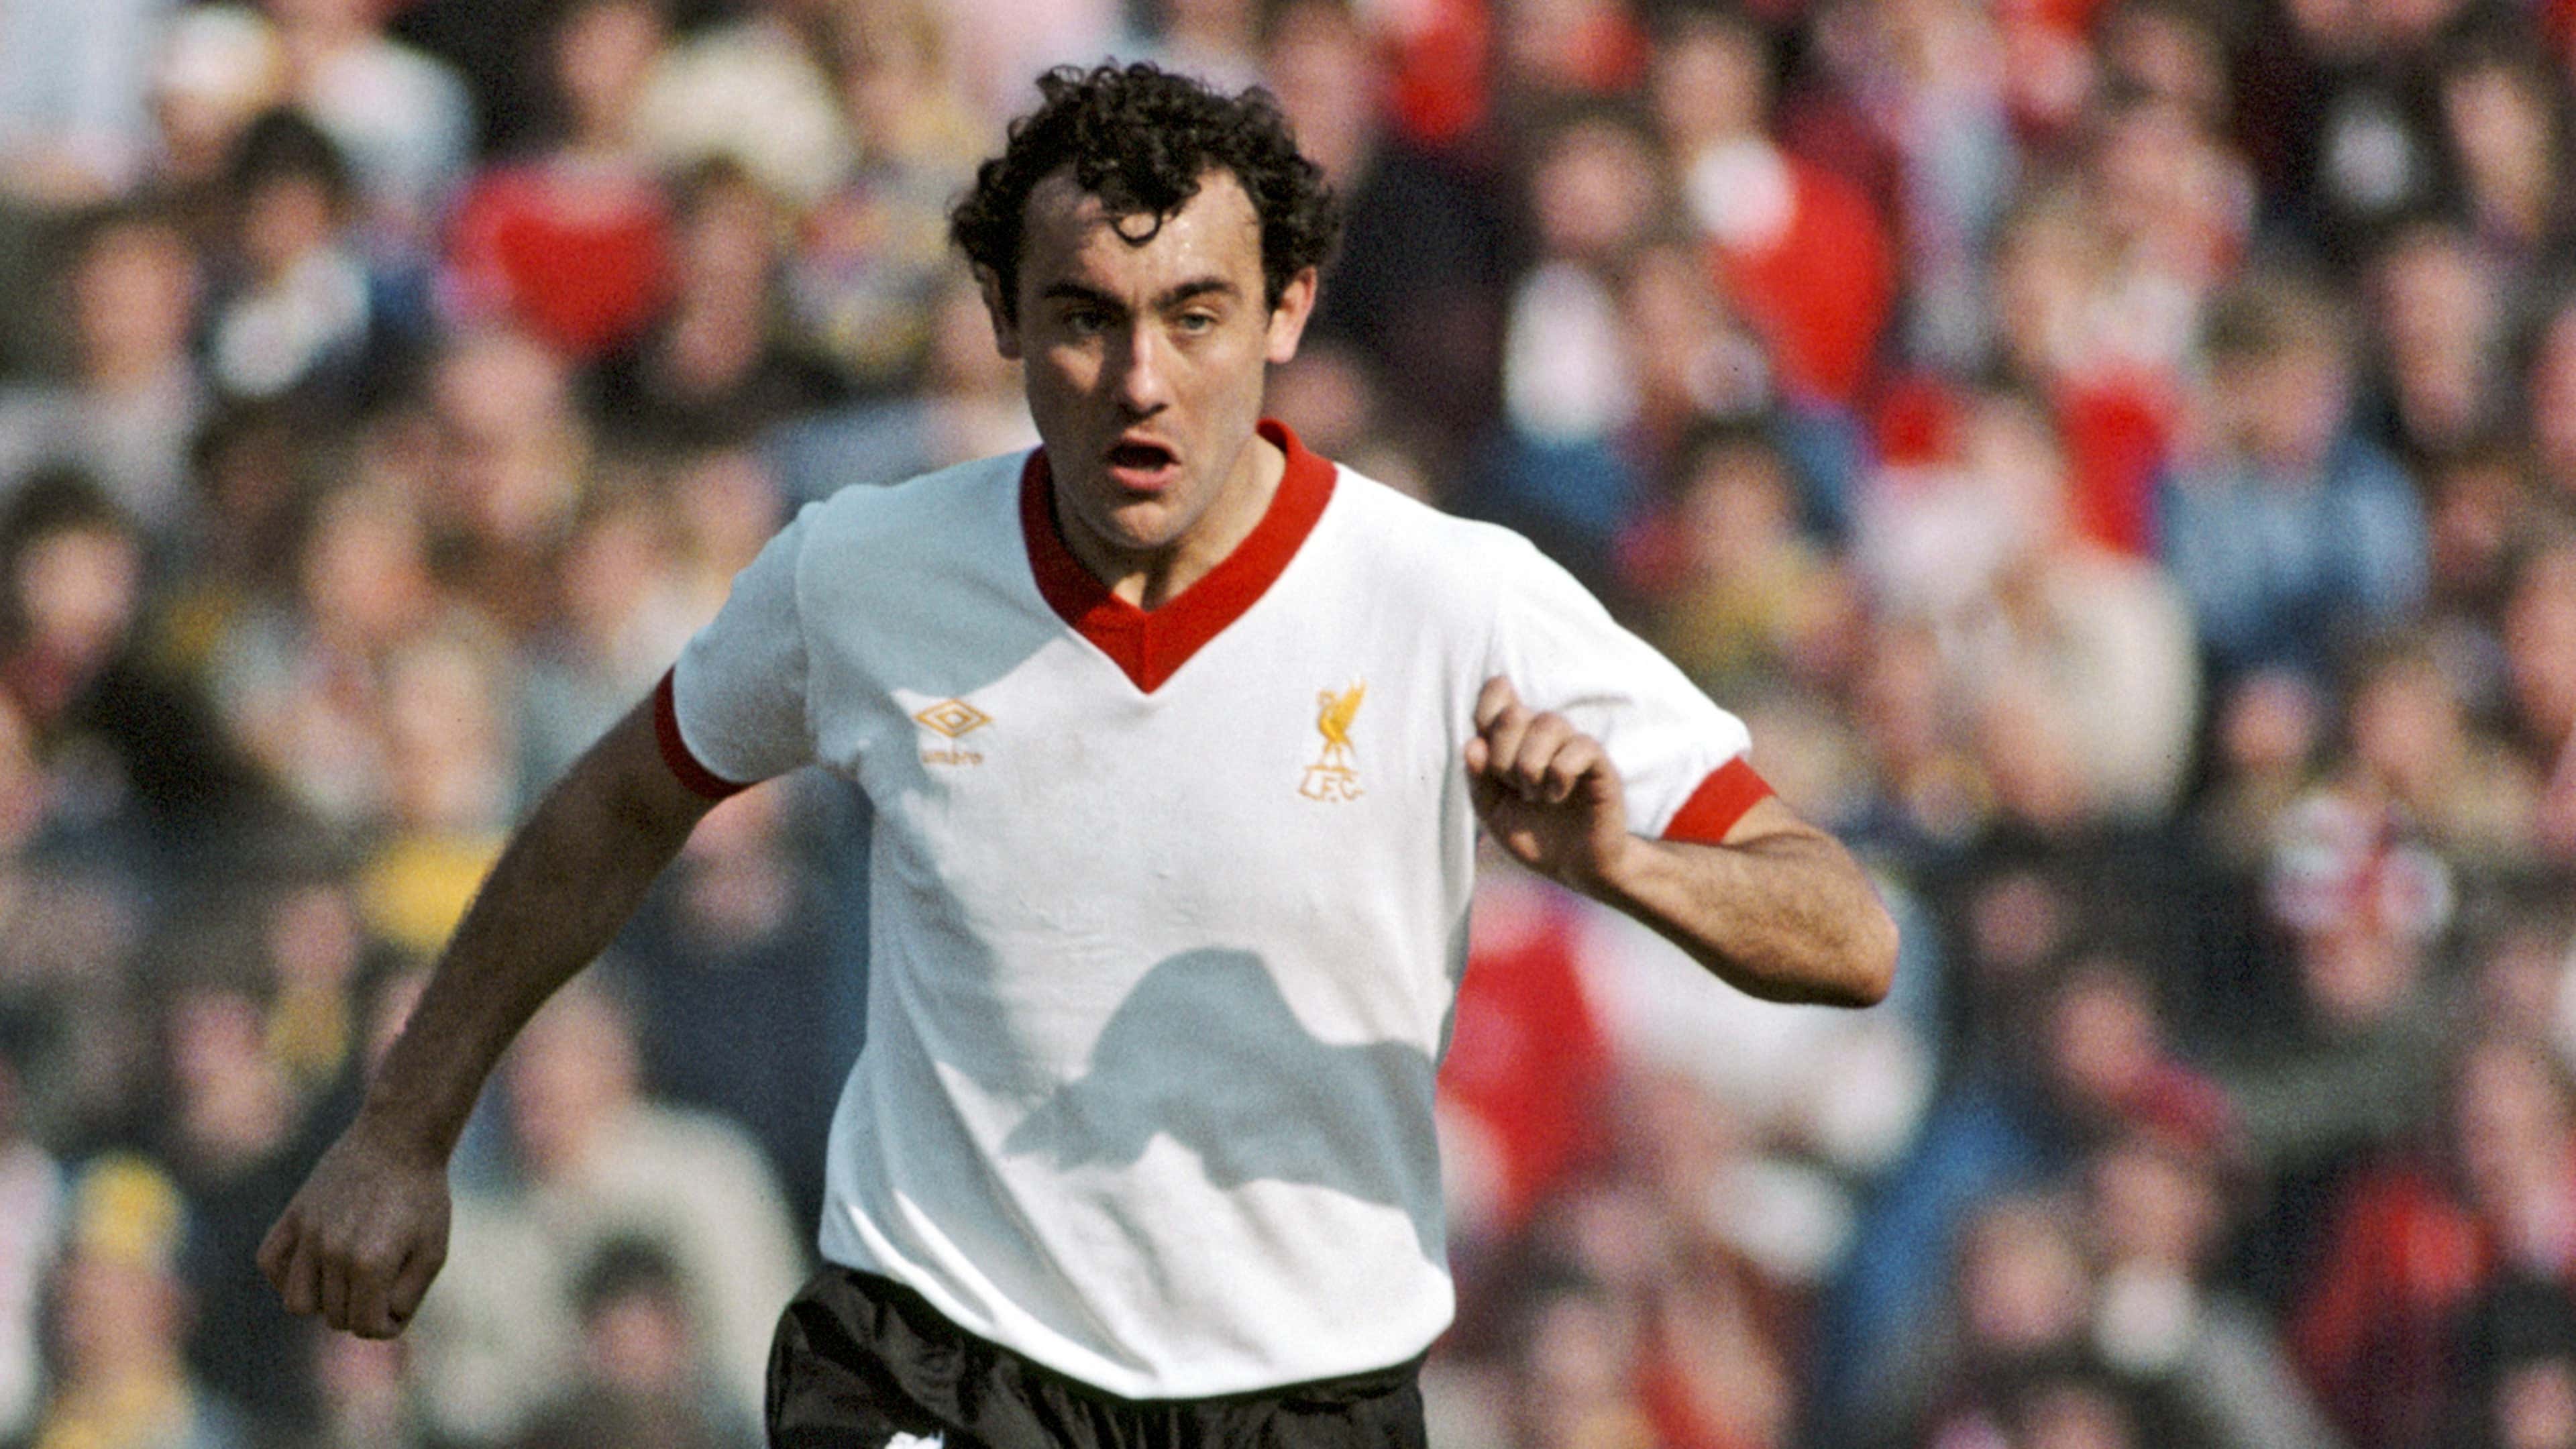 Liverpool's 10 Best Away Kits of All Time - Ranked